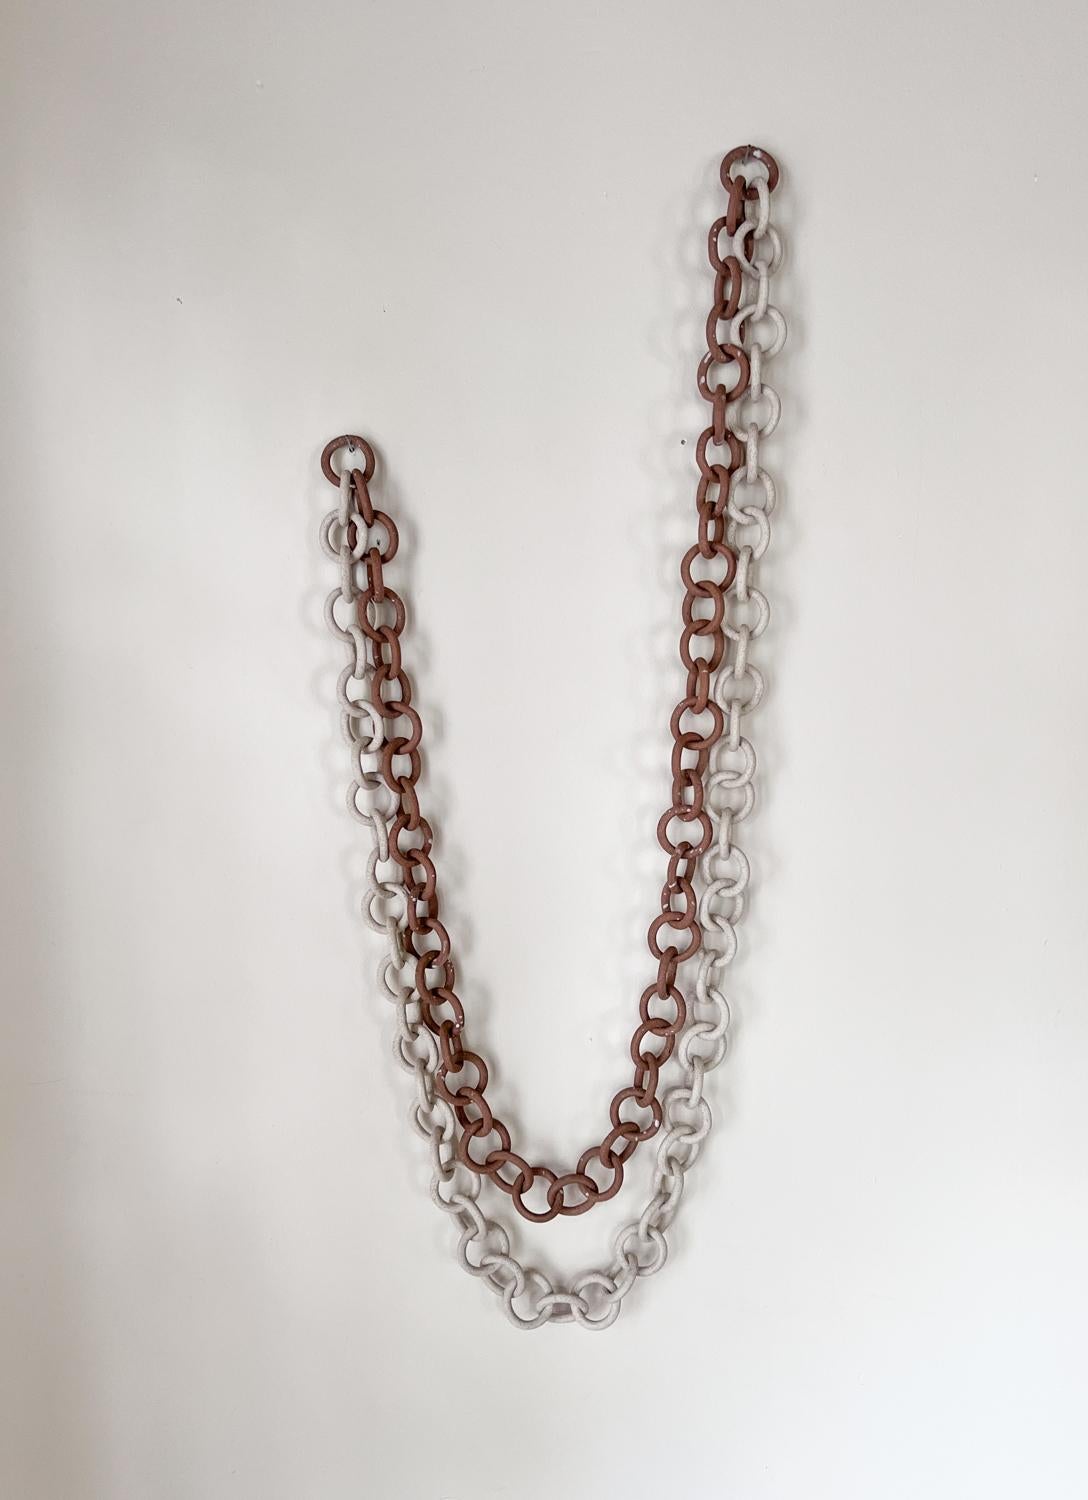 Hand-Crafted Ceramic Link Chain Sculpture and Wall Hanging For Sale